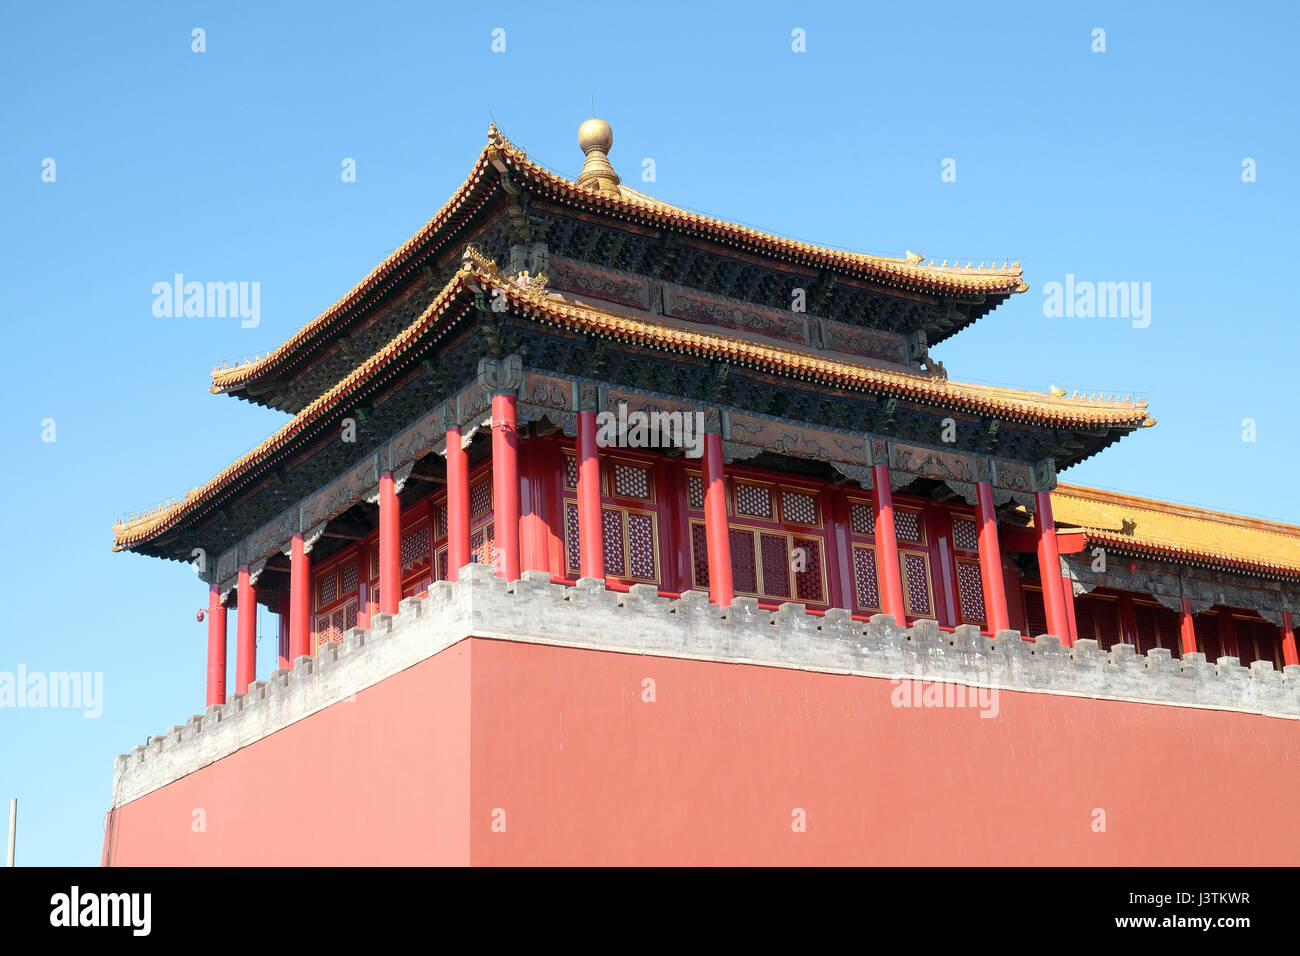 Solemn Tower, The Meridian Gate Wumen in the Forbidden City, Beijing, China, February 23, 2016. Stock Photo